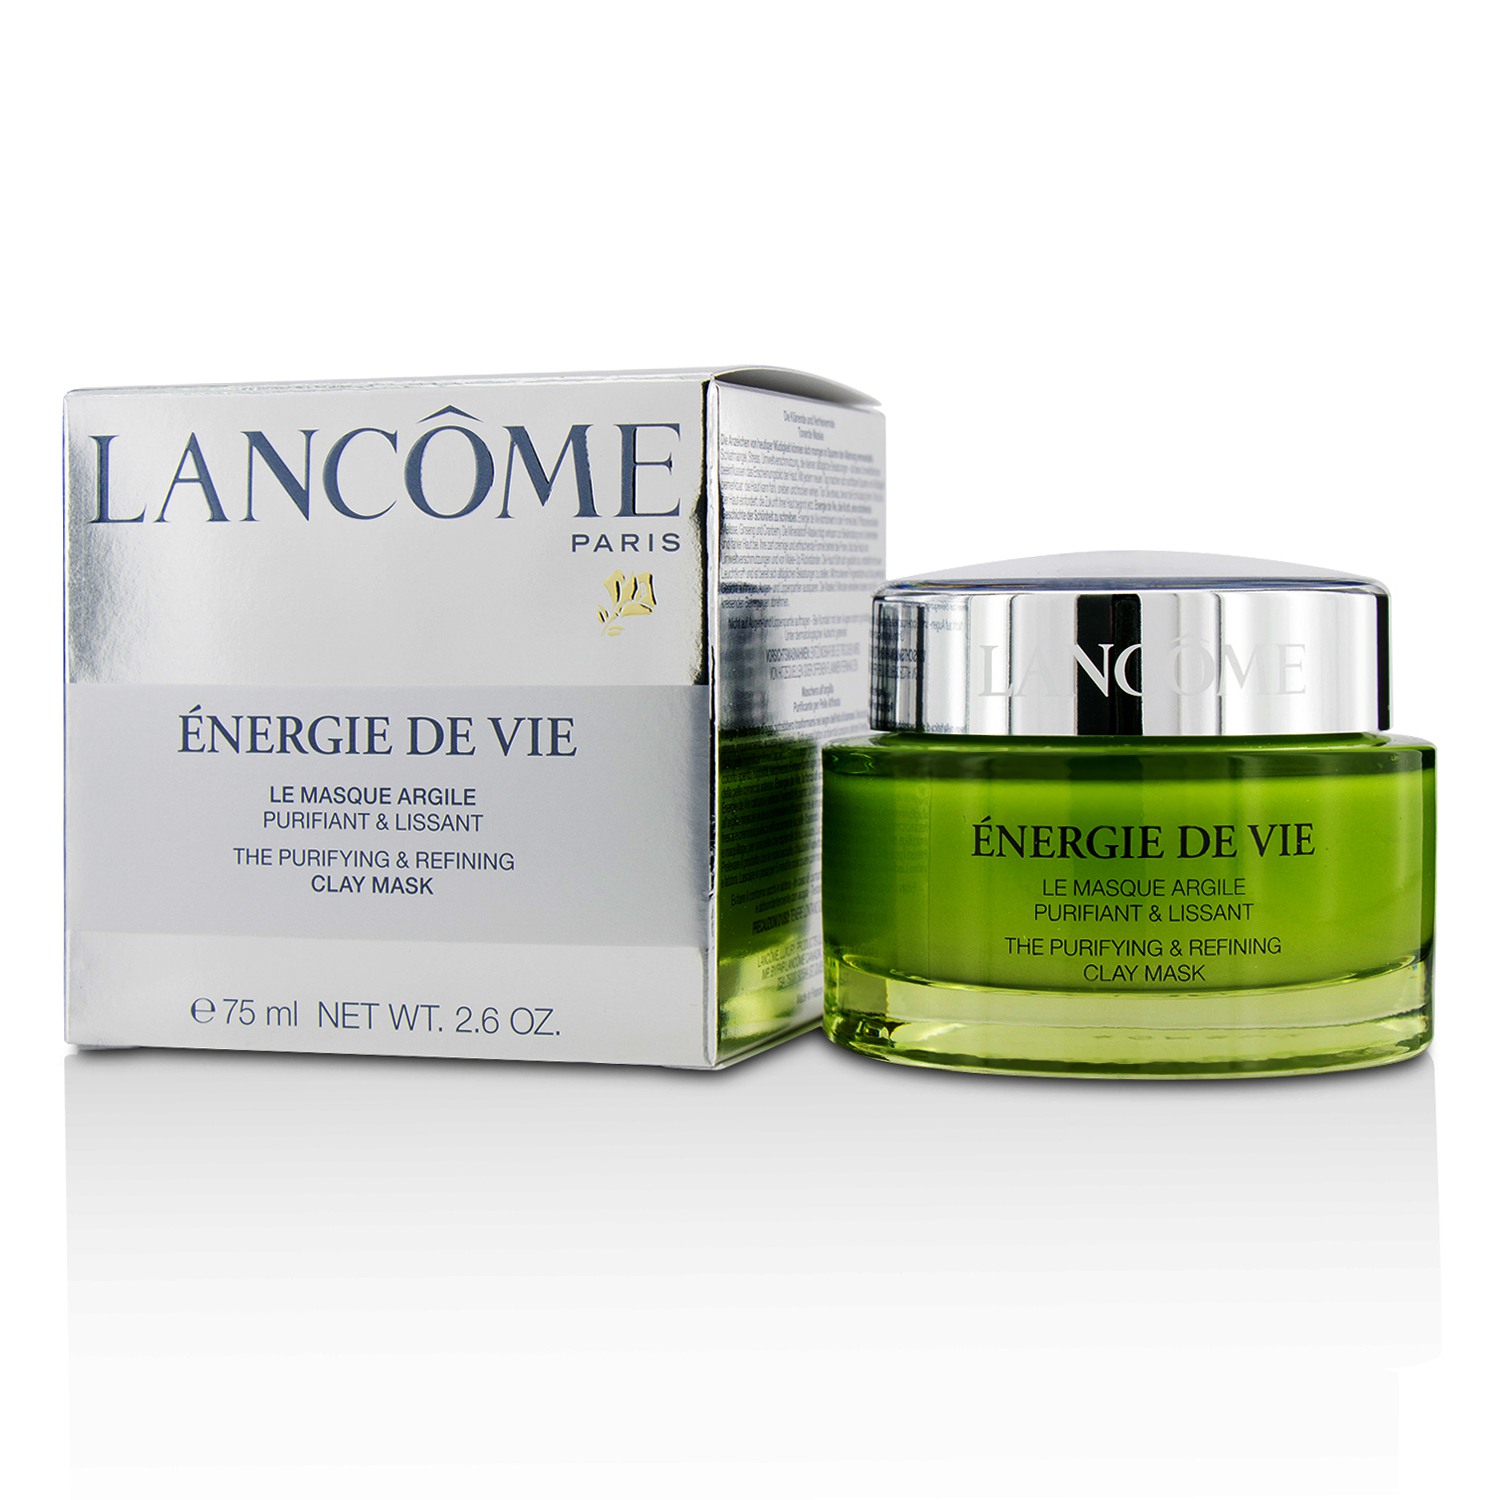 Energie De Vie The Purifying & Refining Clay Mask Lancome Image